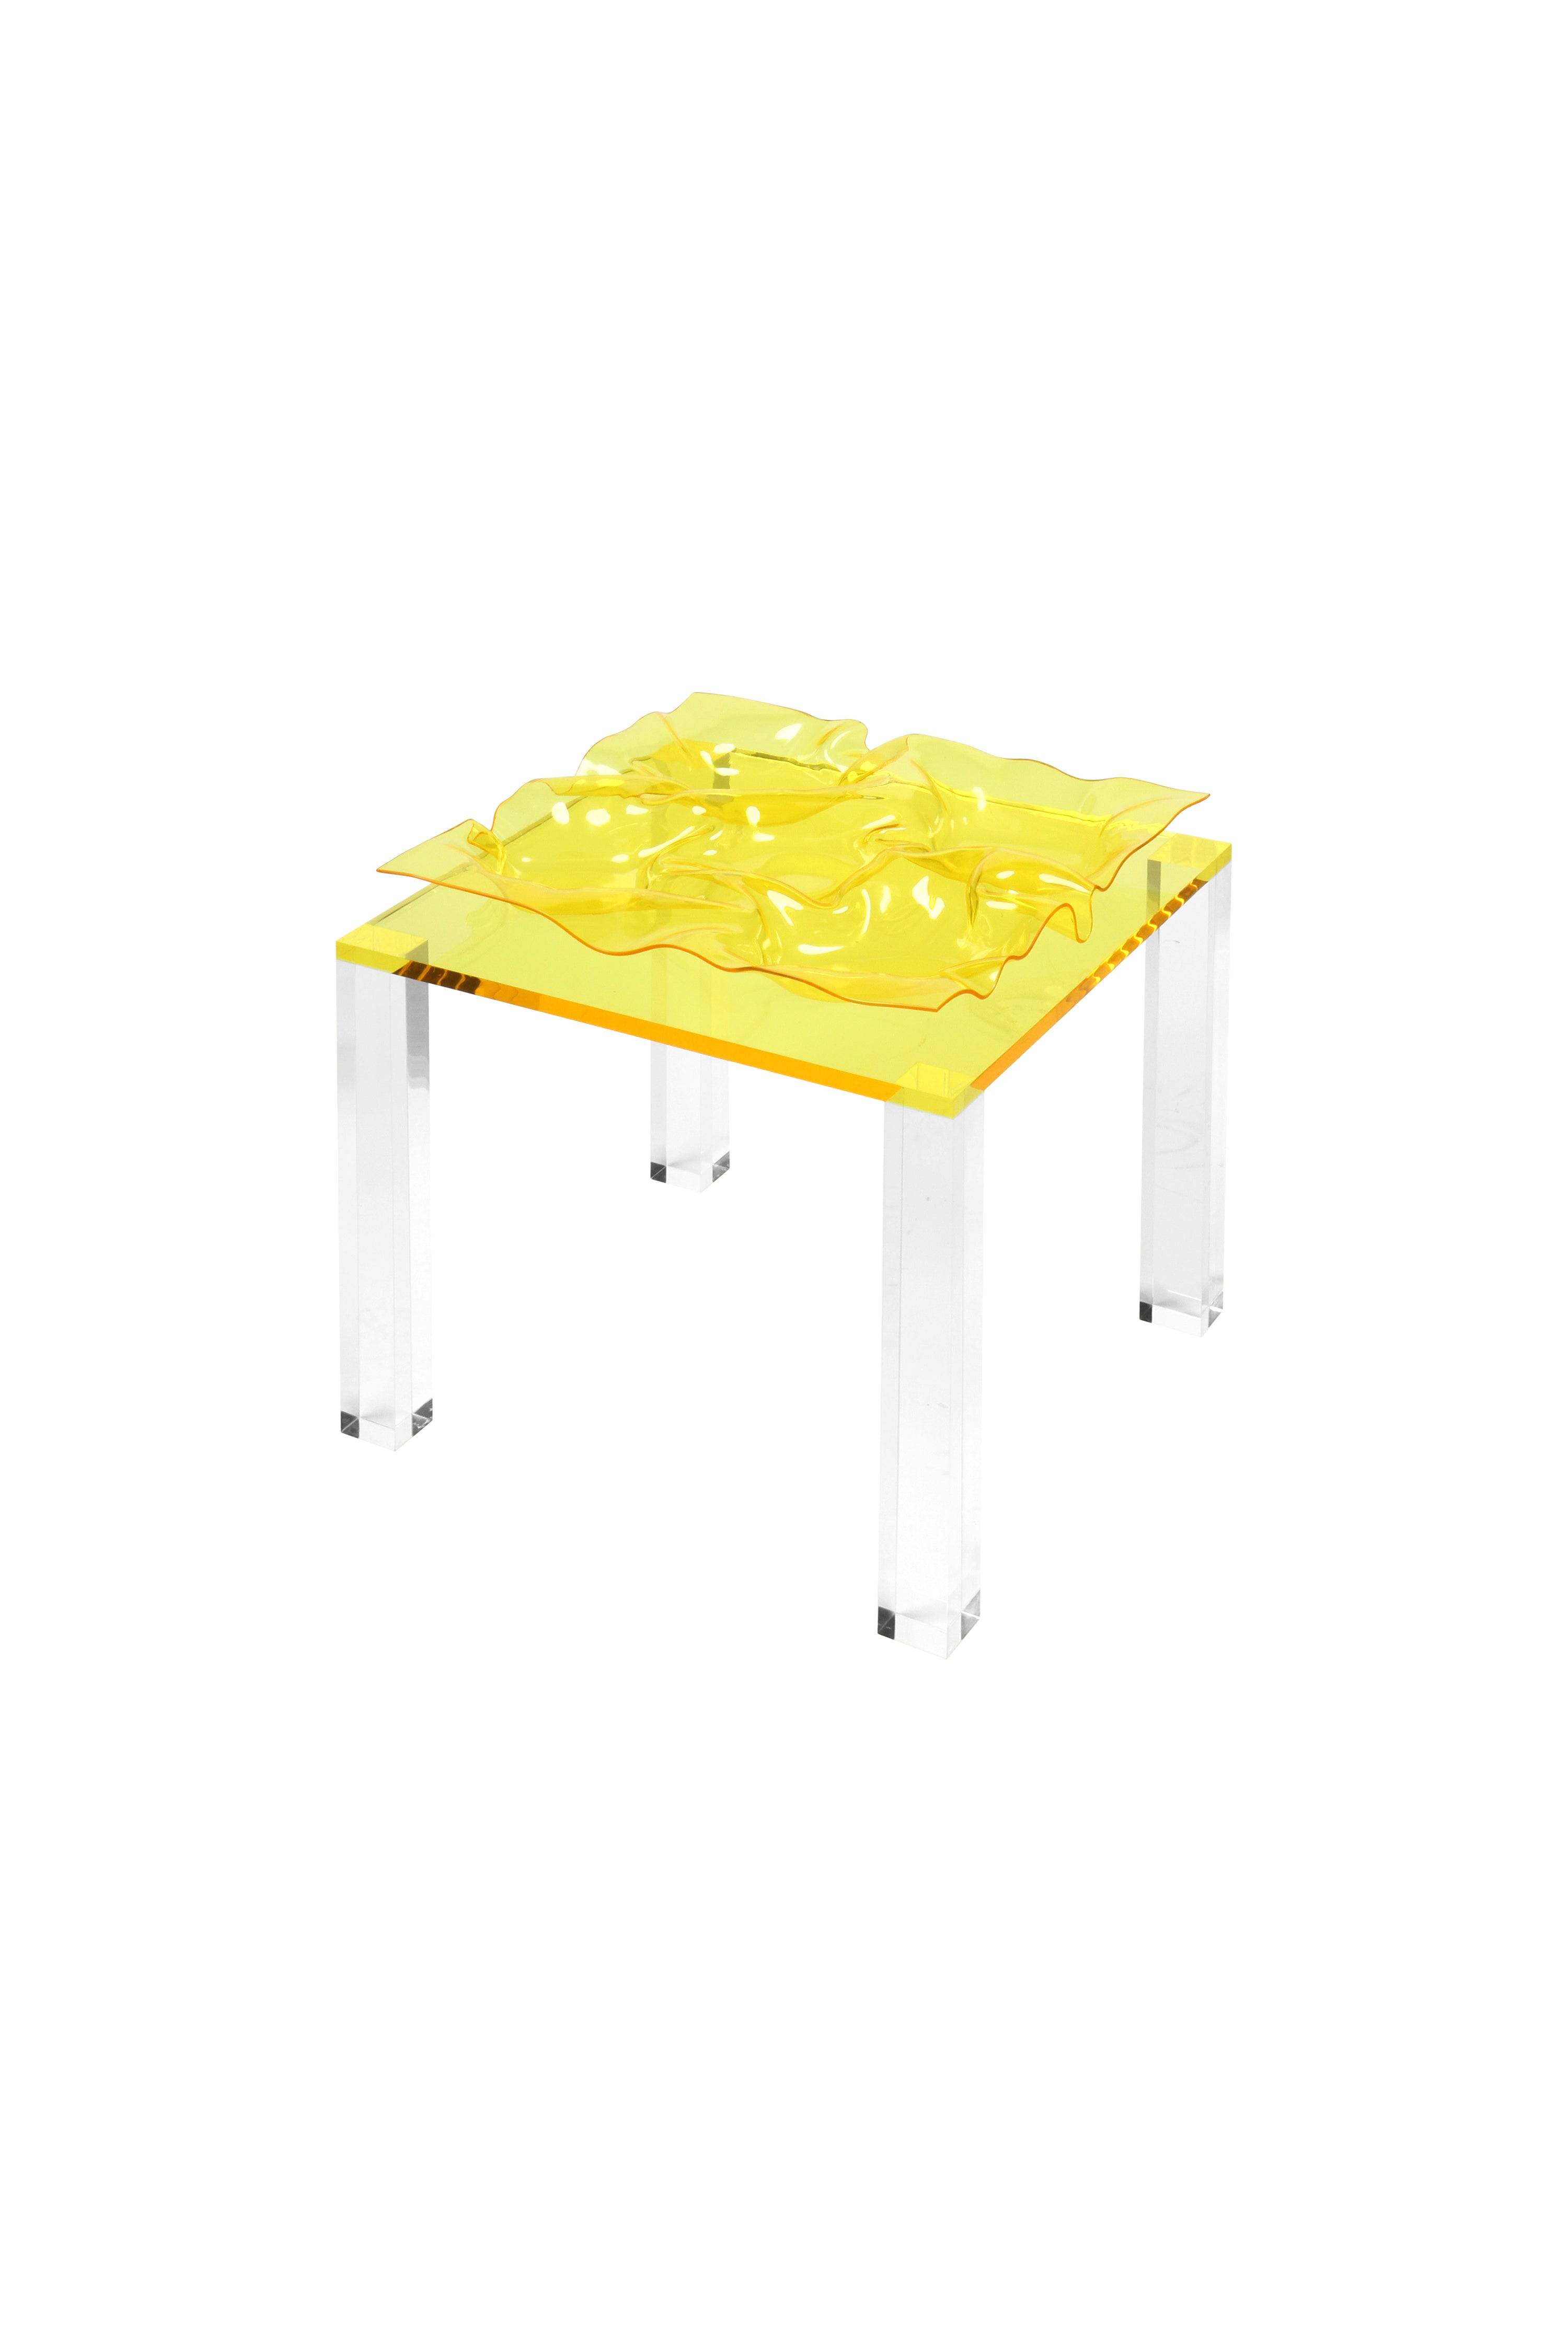 The Constance side table in Yellow